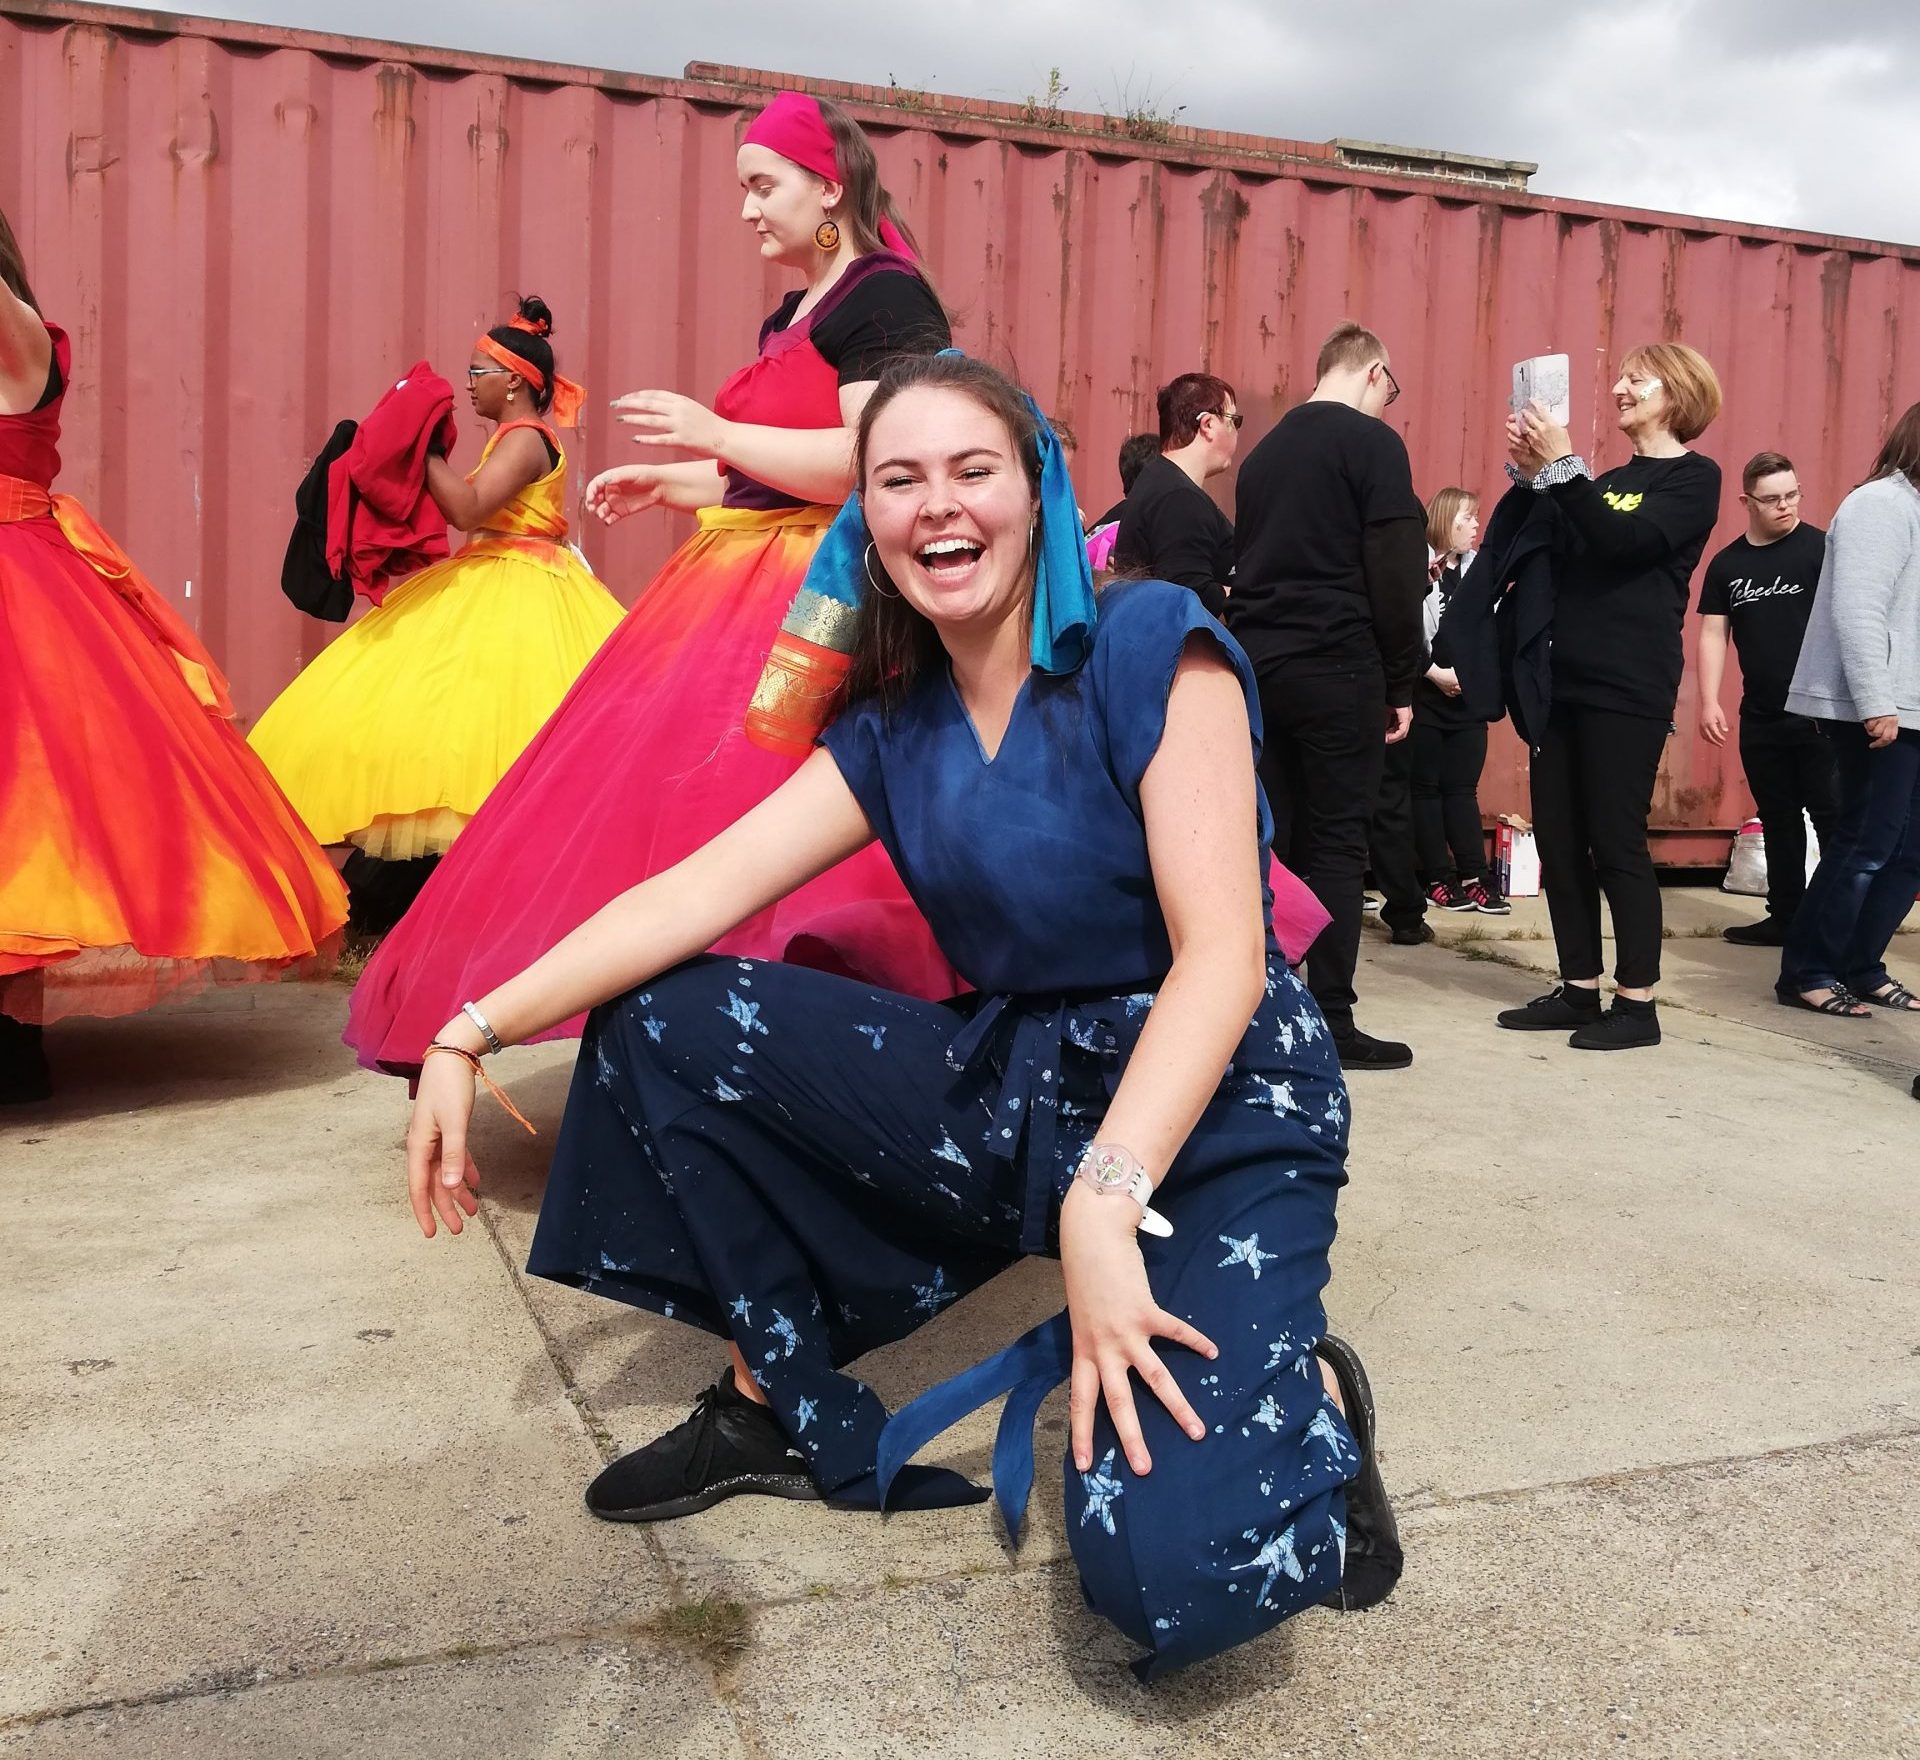 Profile image of Sally Hendry, Company DNA Director, crouching in front of a shipping container with people in costume behind her.